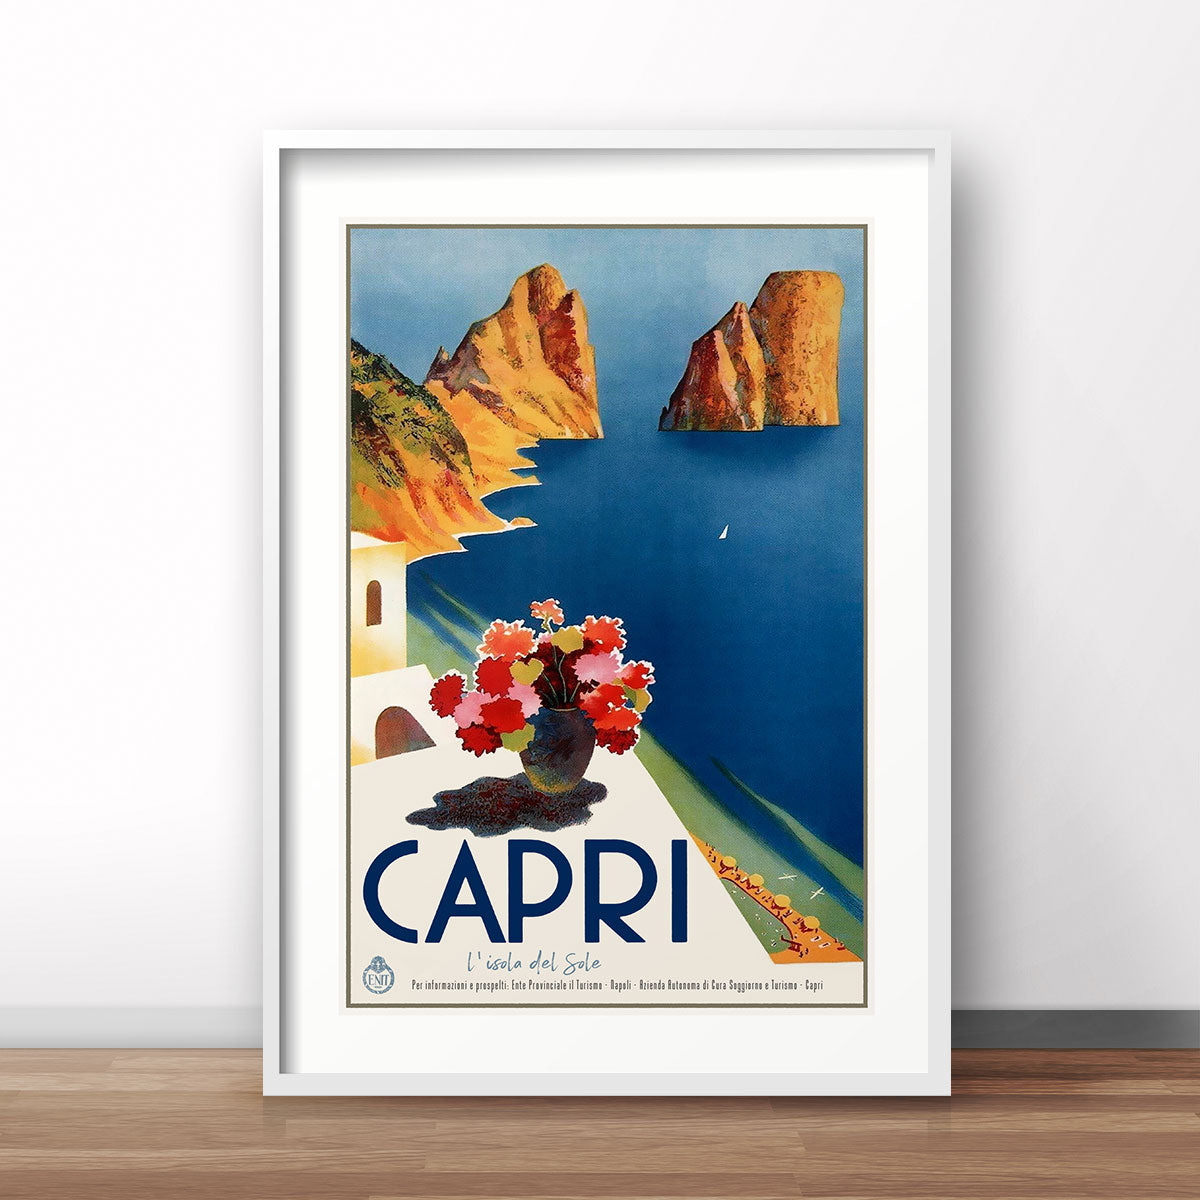 Capri Italy retro vintage travel poster print from Places We Luv